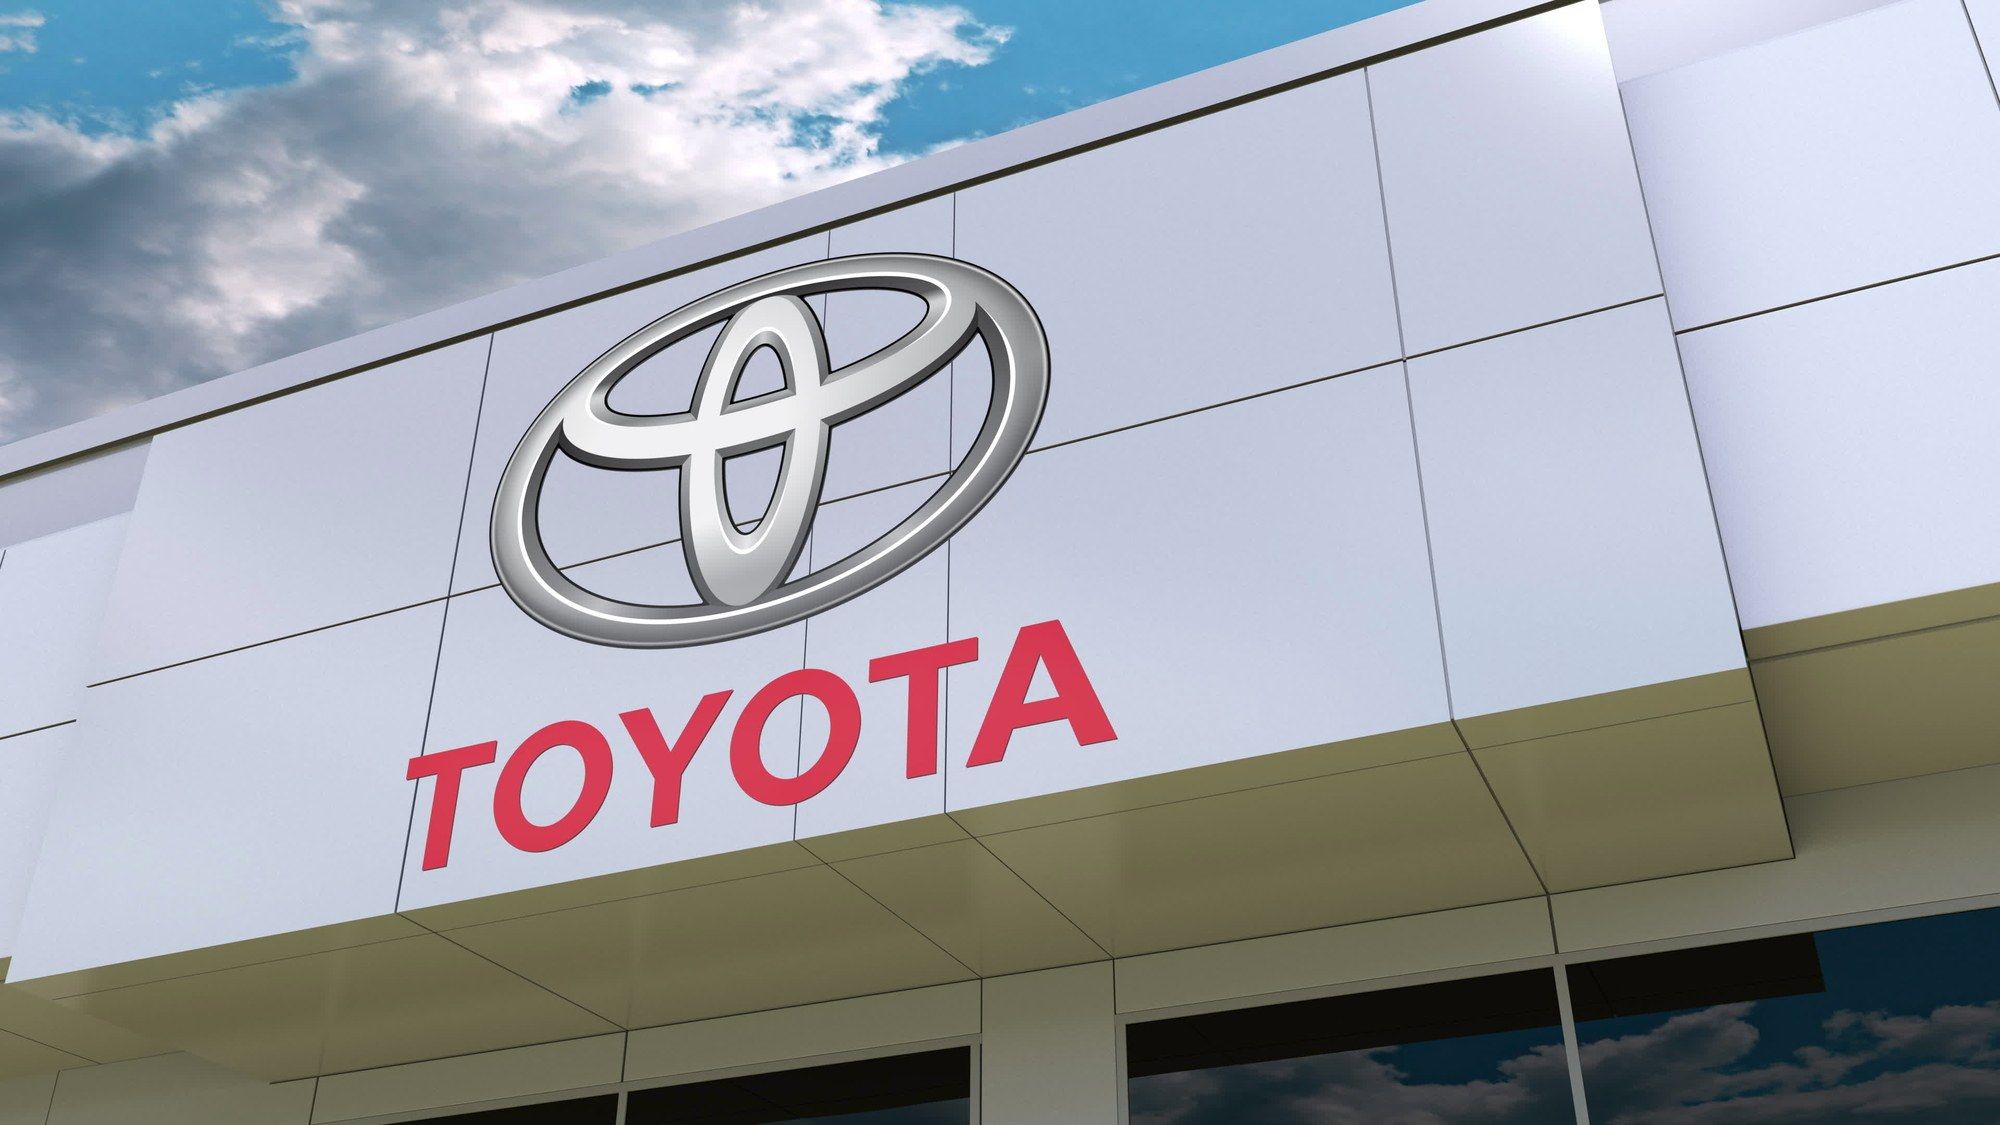 Toyota Dealership Ran Credit Check Against Woman’s Will, Class Action